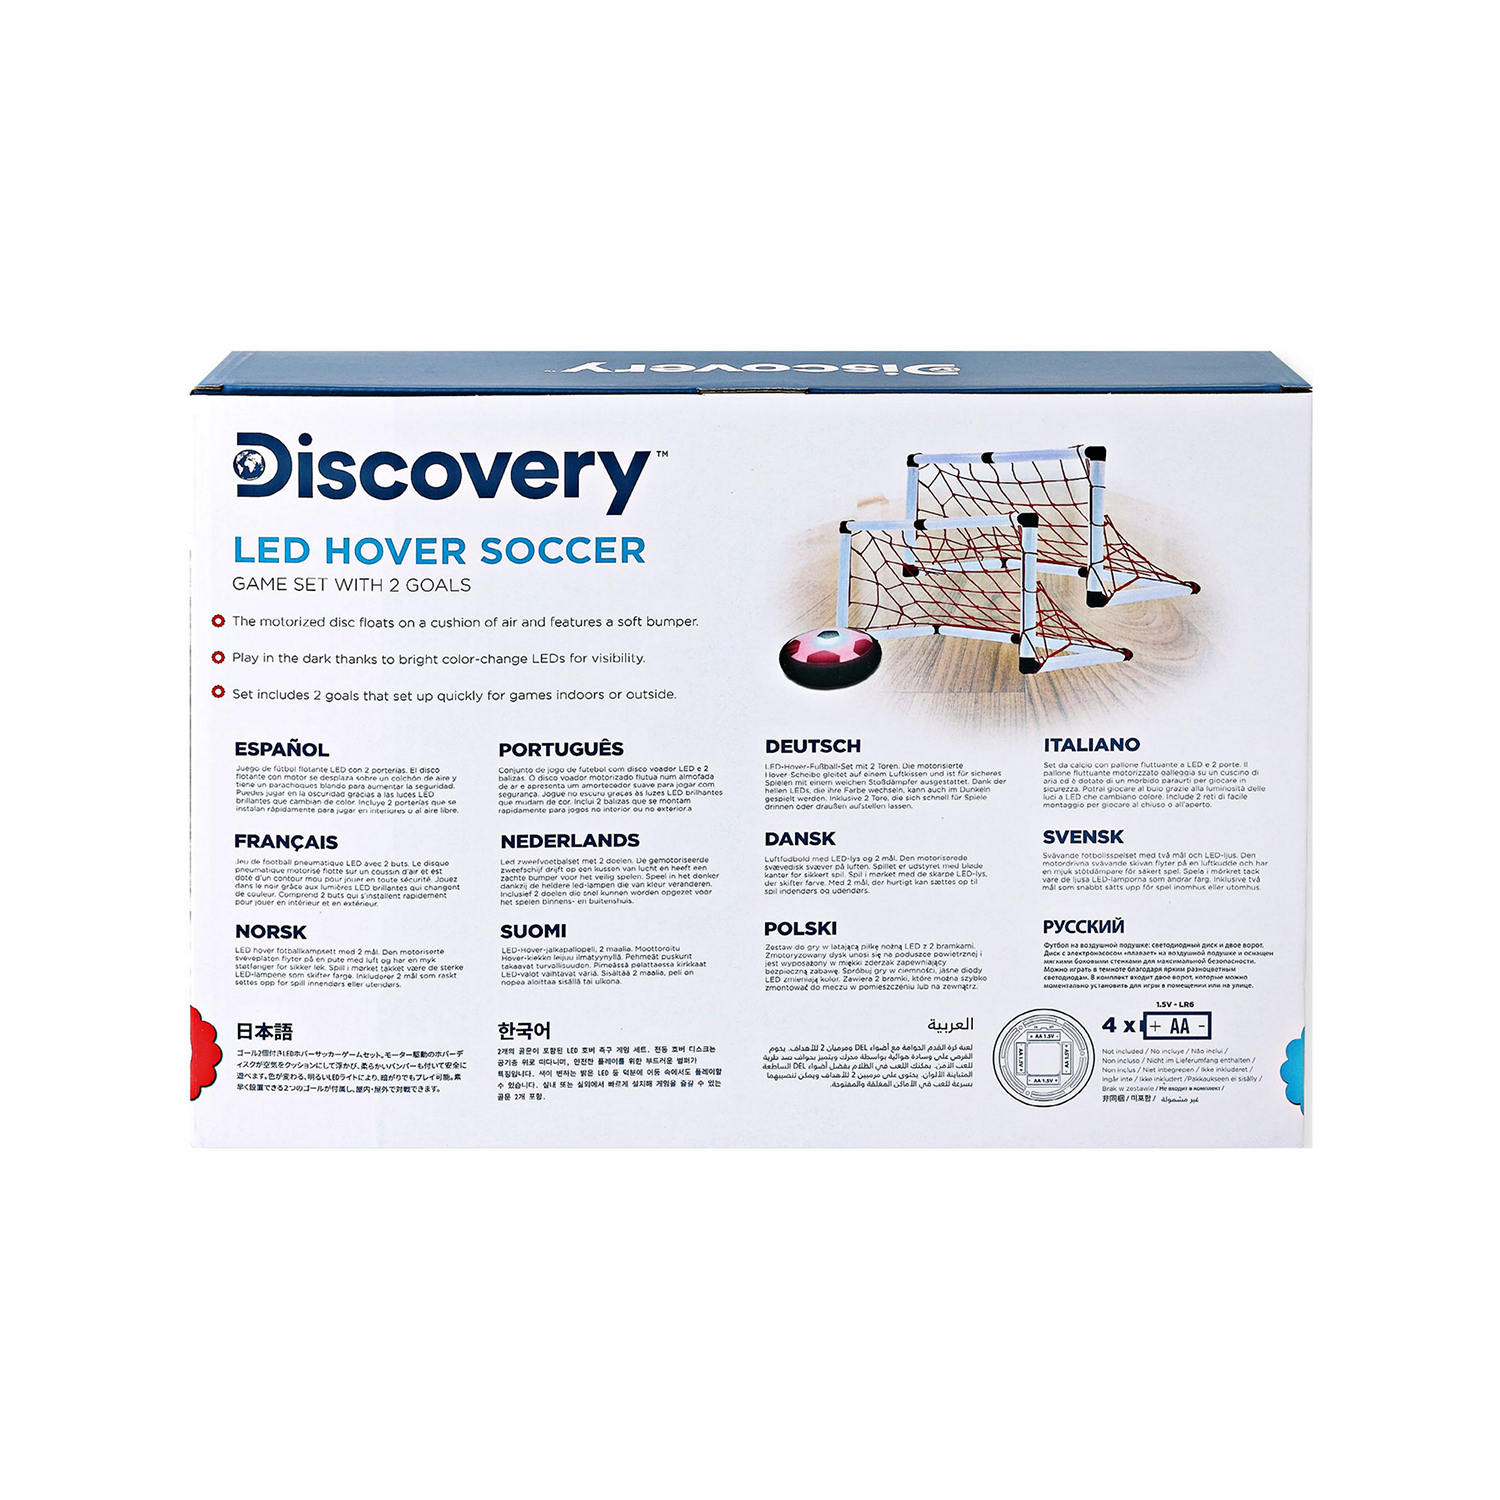 Discovery LED Hover Soccer